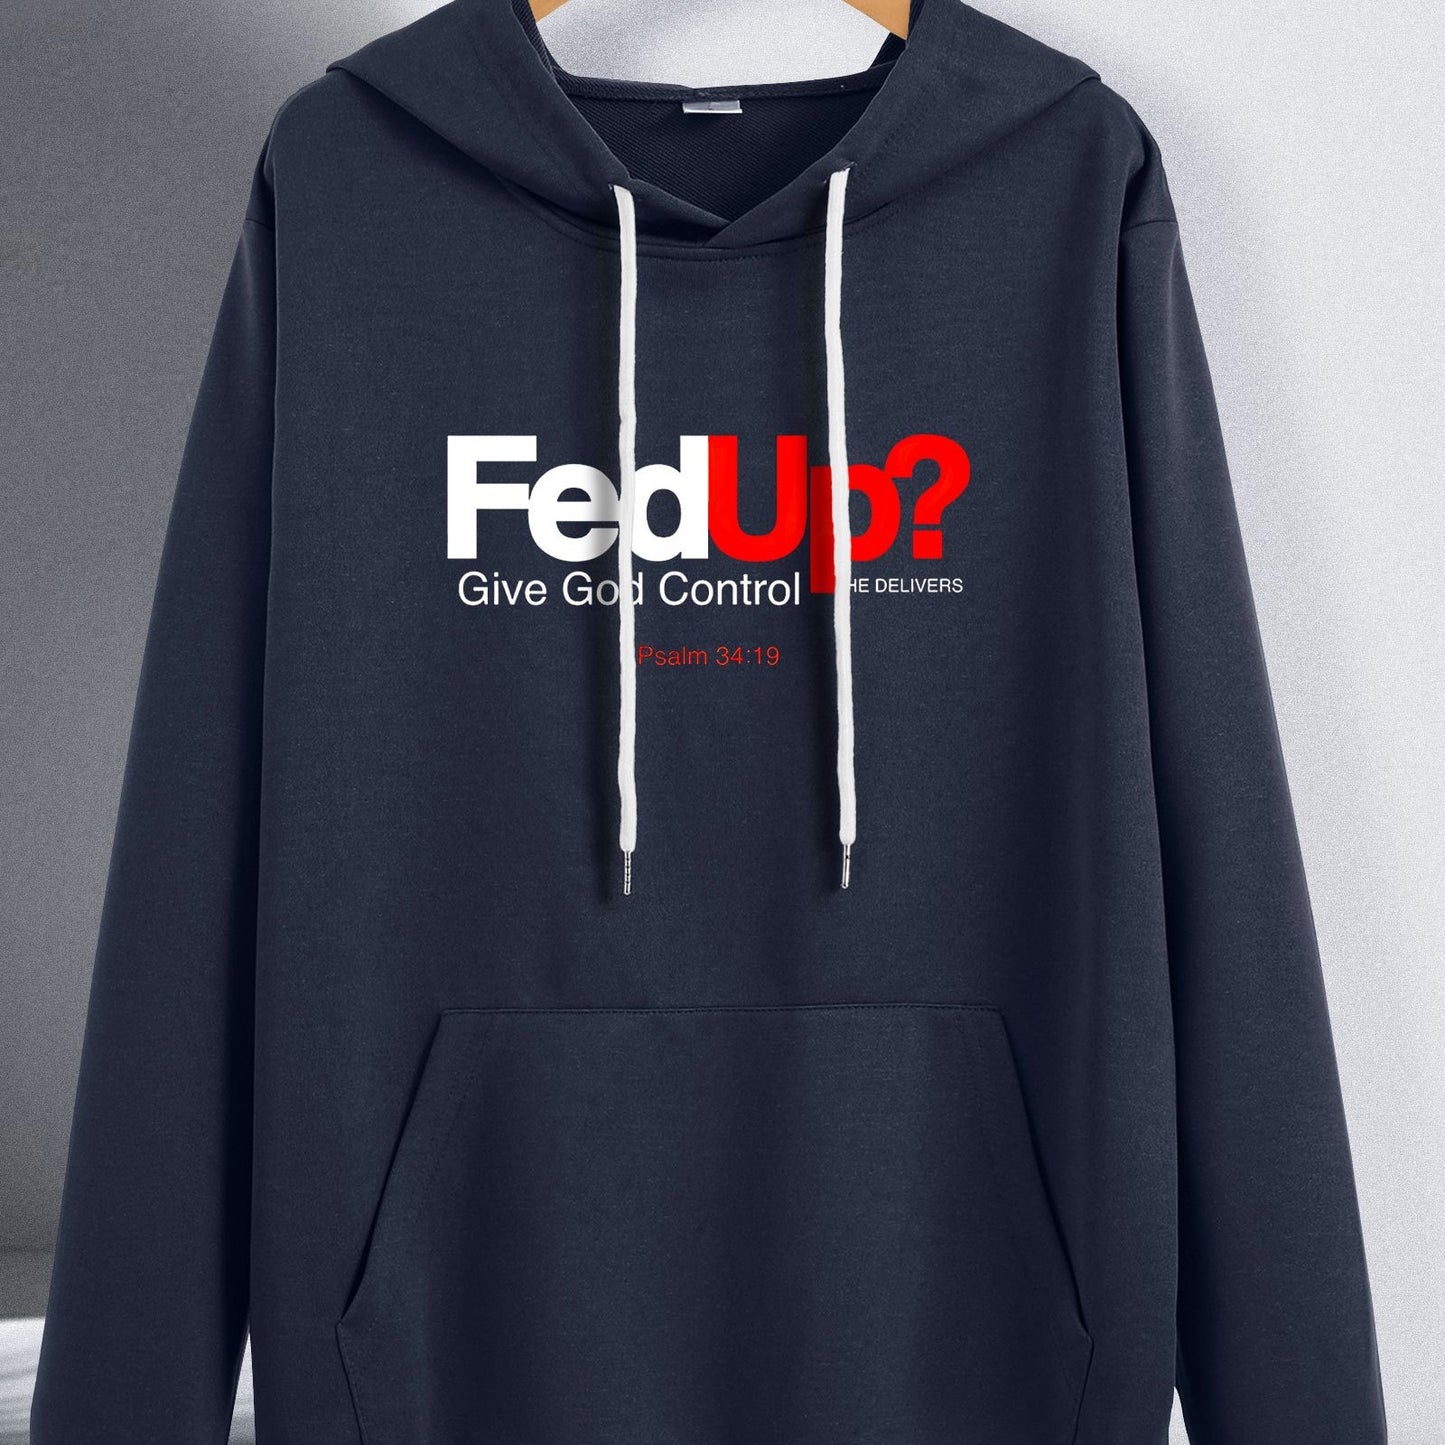 Fed Up Give God Control He Delivers Men's Christian Pullover Hooded Sweatshirt claimedbygoddesigns